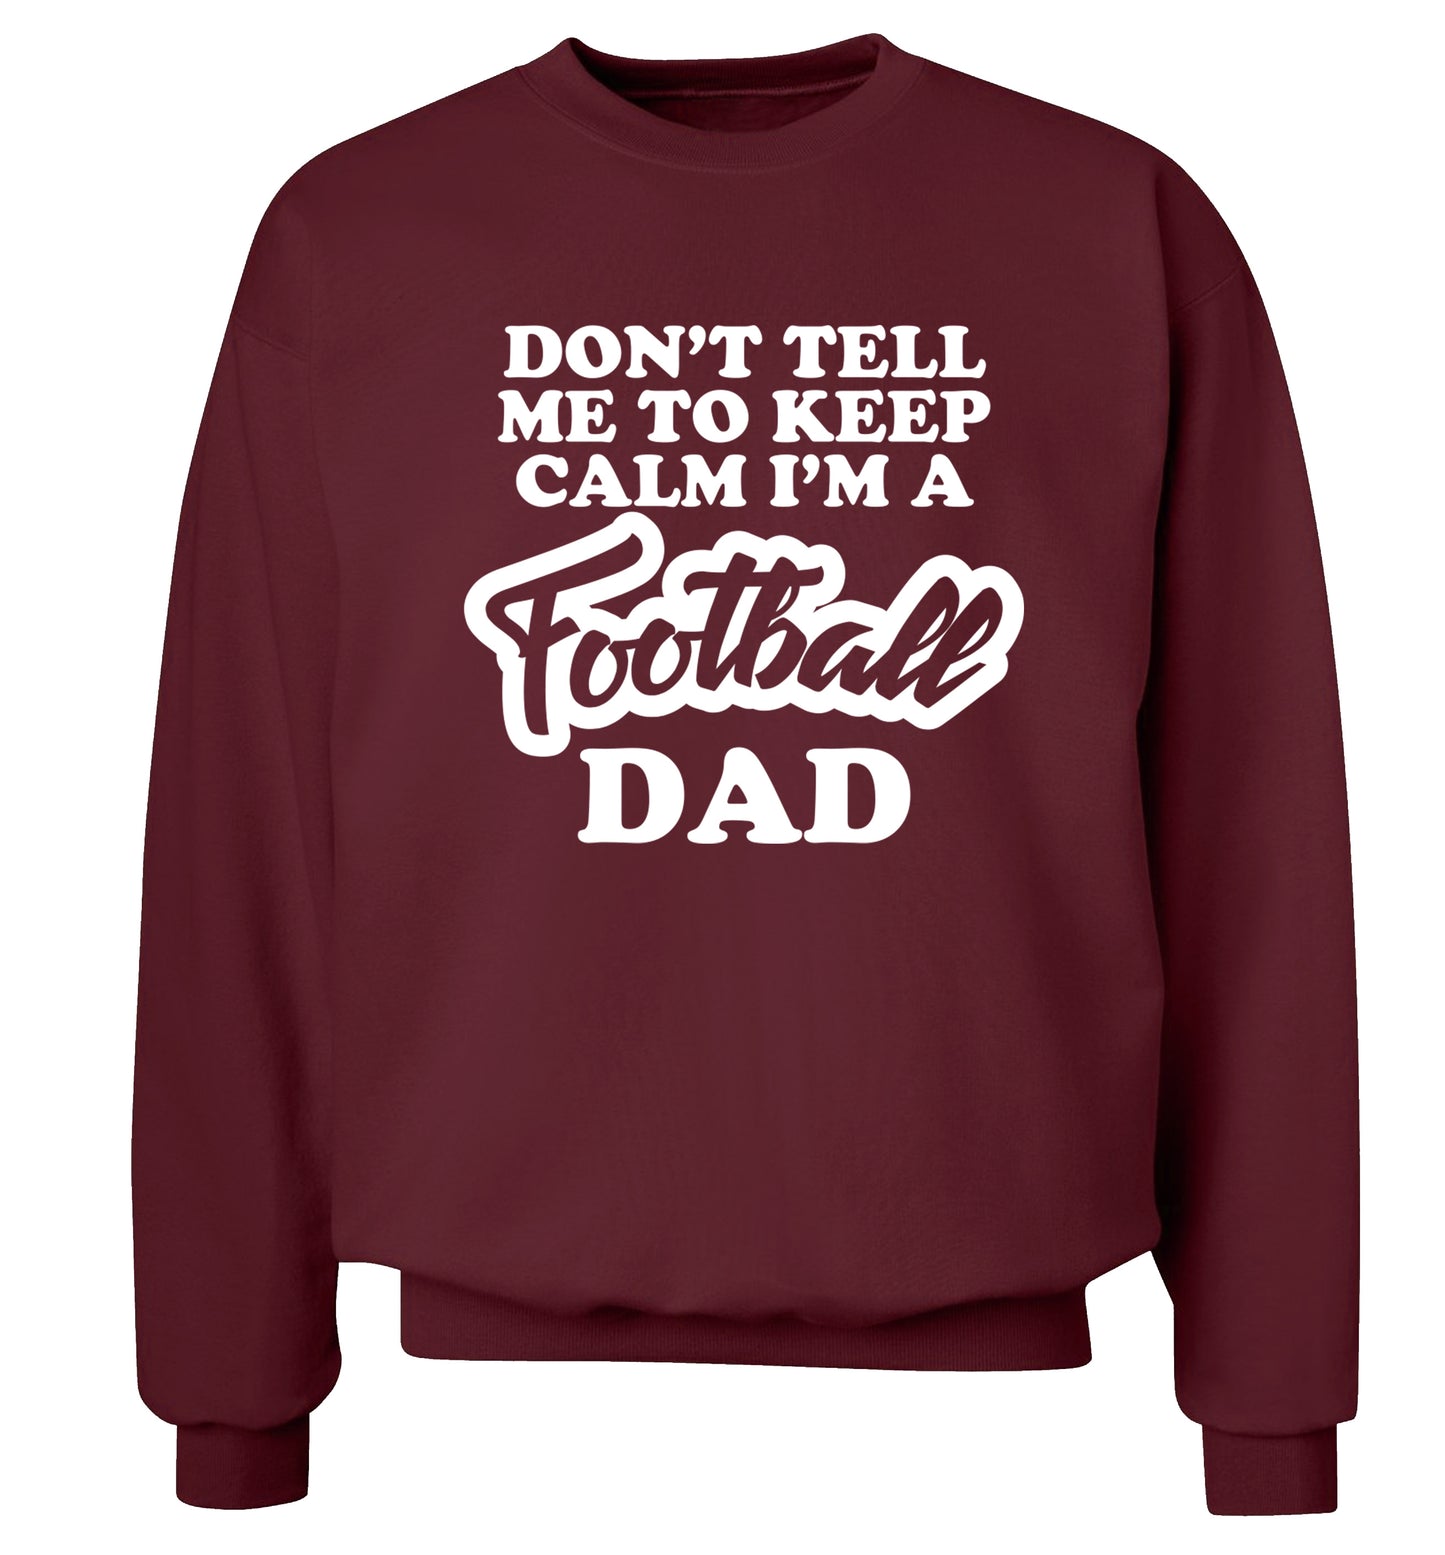 Don't tell me to keep calm I'm a football grandad Adult's unisexmaroon Sweater 2XL